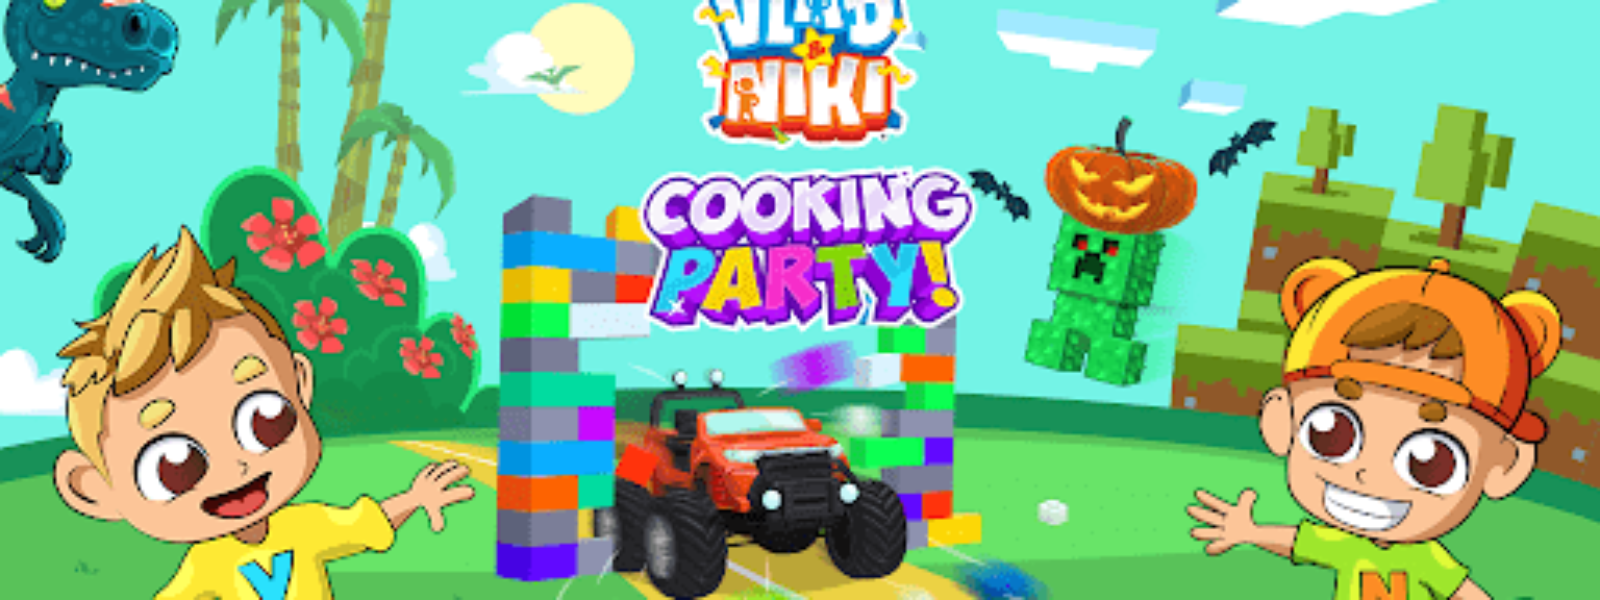 Cooking Party with Vlad & Niki pentru Android | iOS